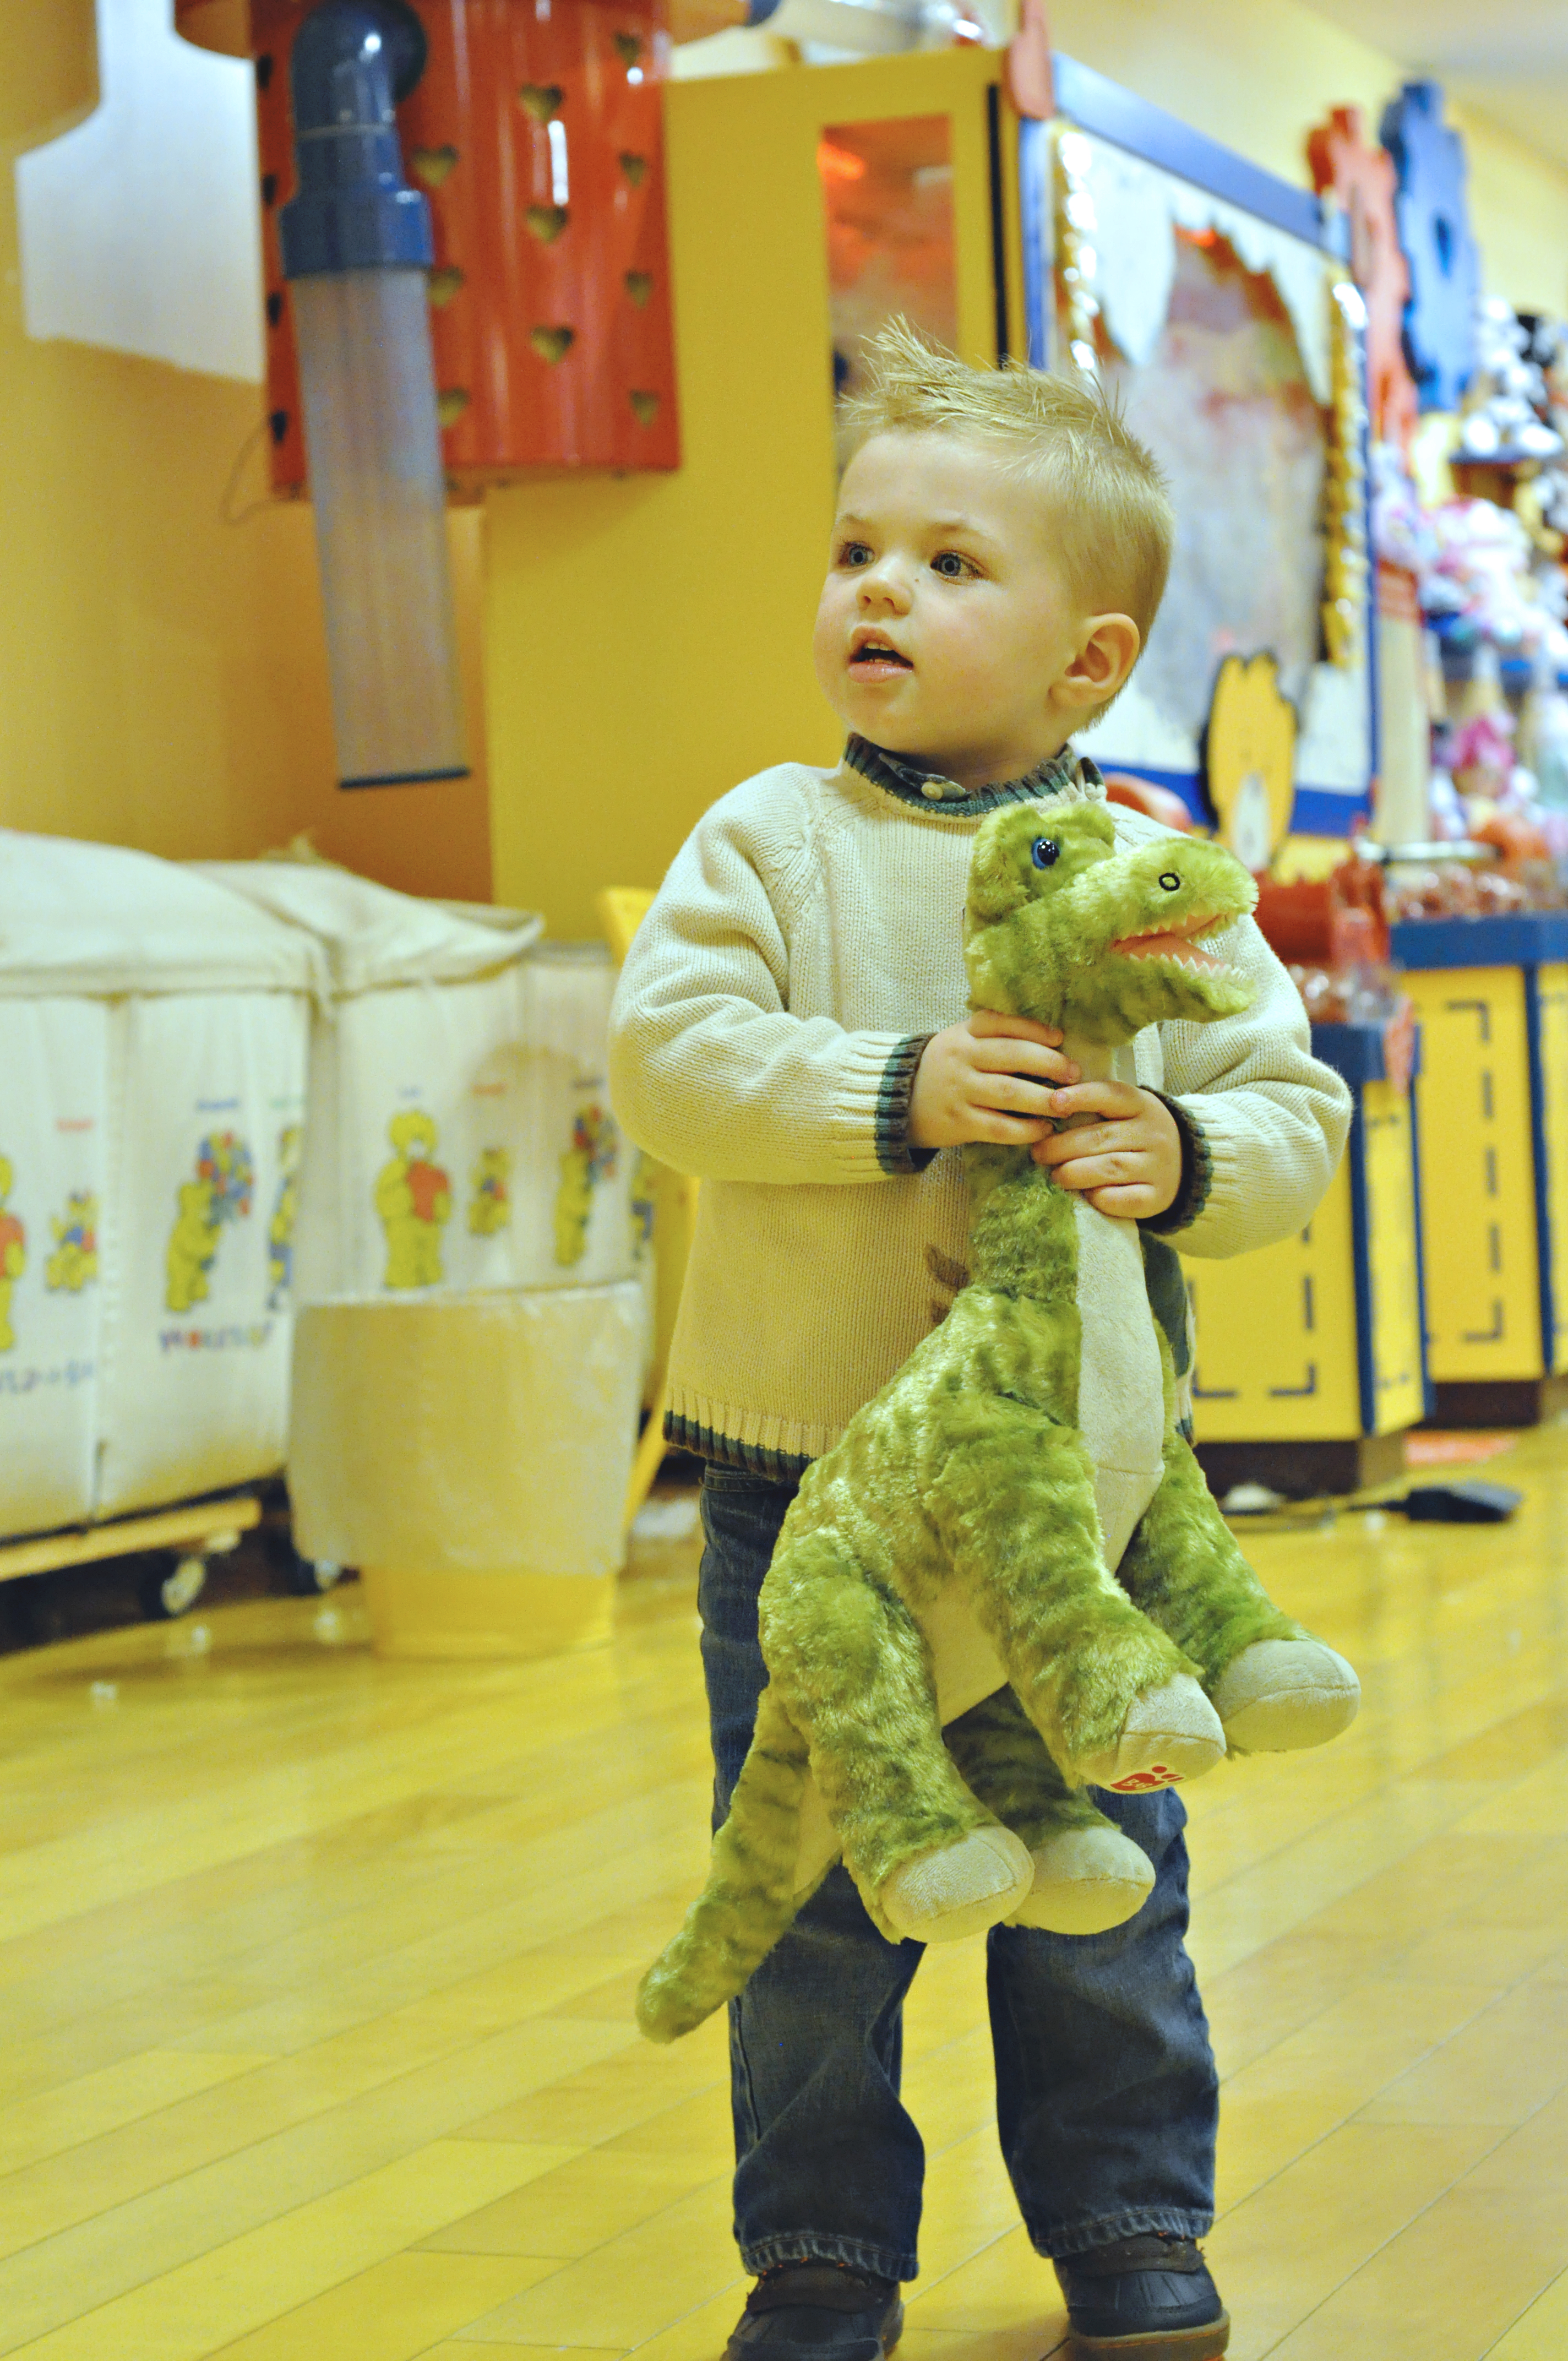 Build-A-Bear Birthday Fun for Two Year Old www.frostedevents.com 